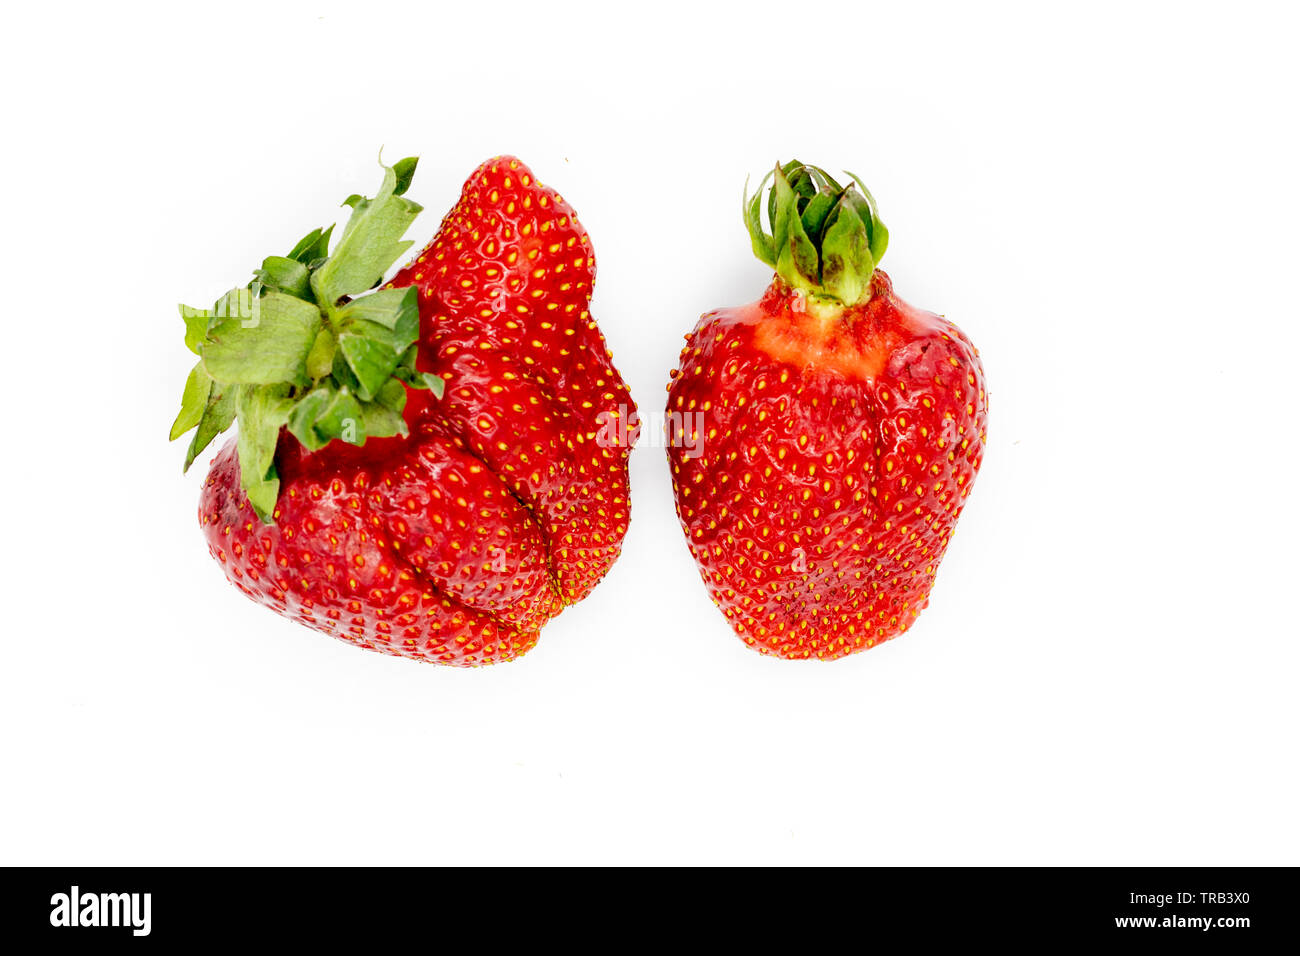 Imperfect Strawberry. Isolated Organic Fruit. Whole Berry Pair Collection. Nature Nutrition for Summer Breakfast. Different Non Ideal Heiroom Berries. Stock Photo